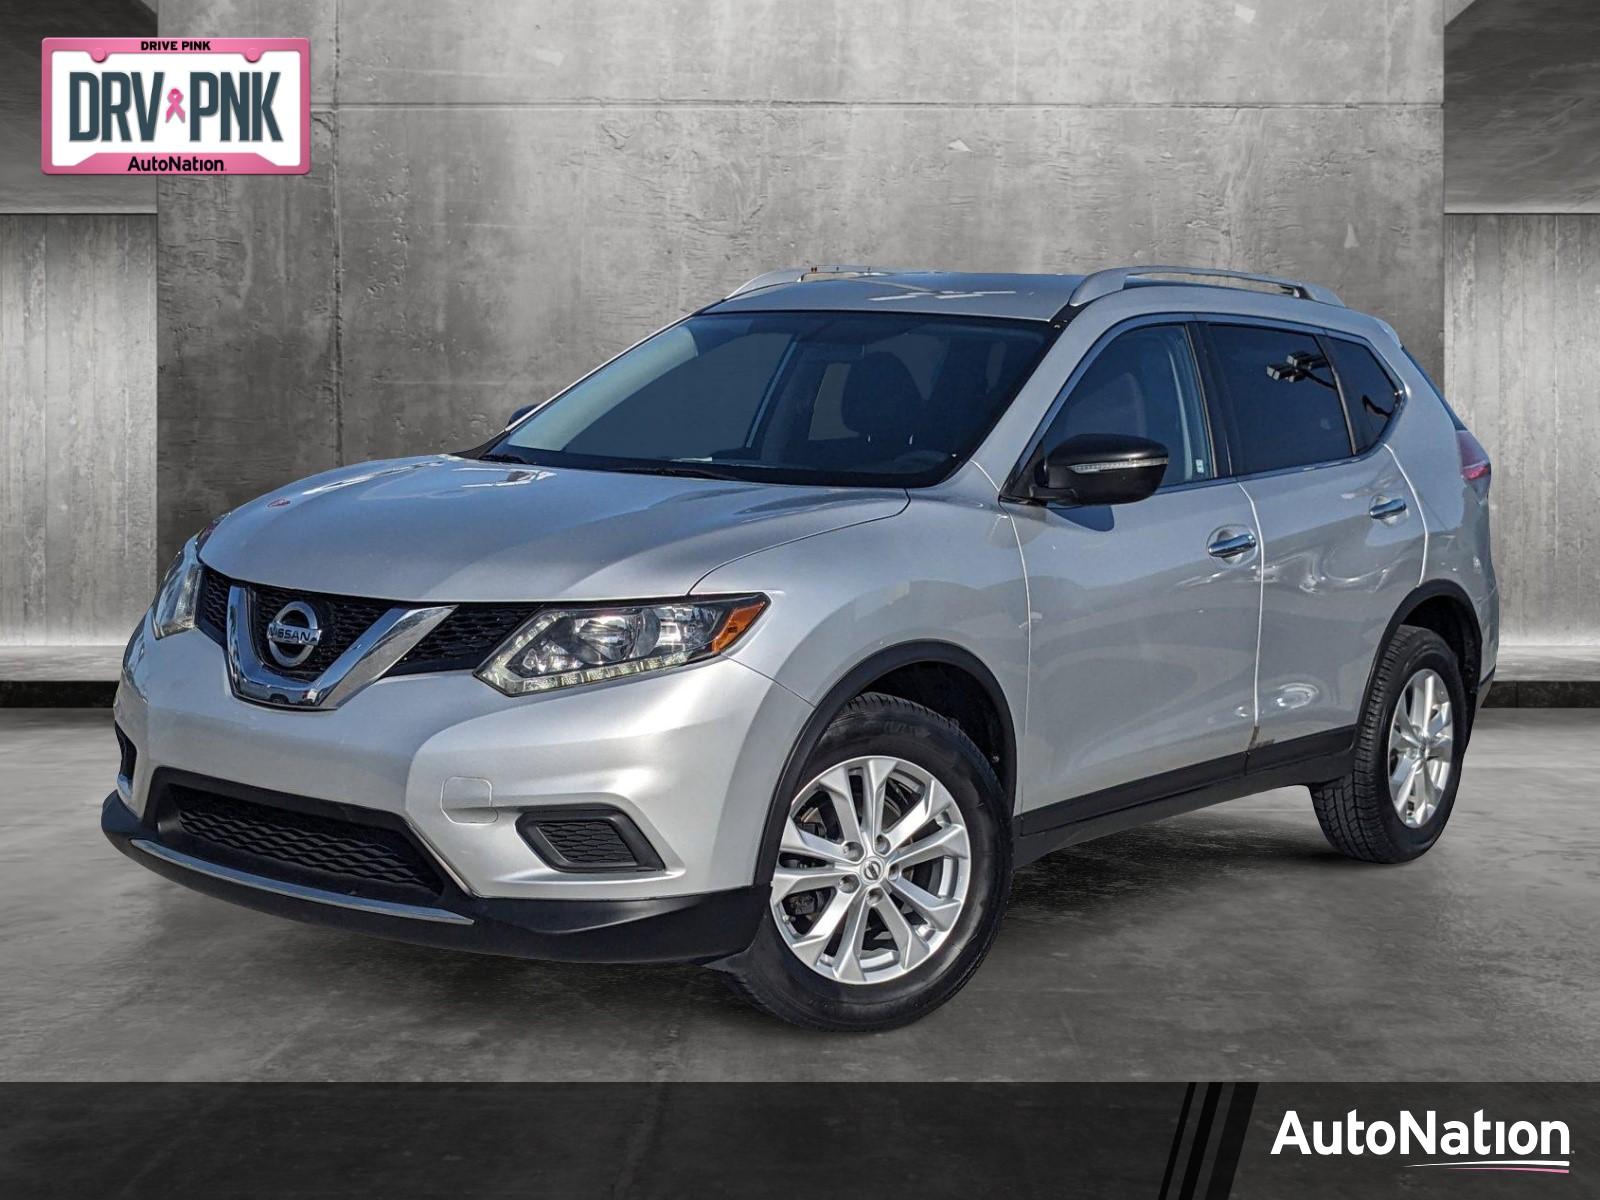 2015 Nissan Rogue Vehicle Photo in MIAMI, FL 33172-3015